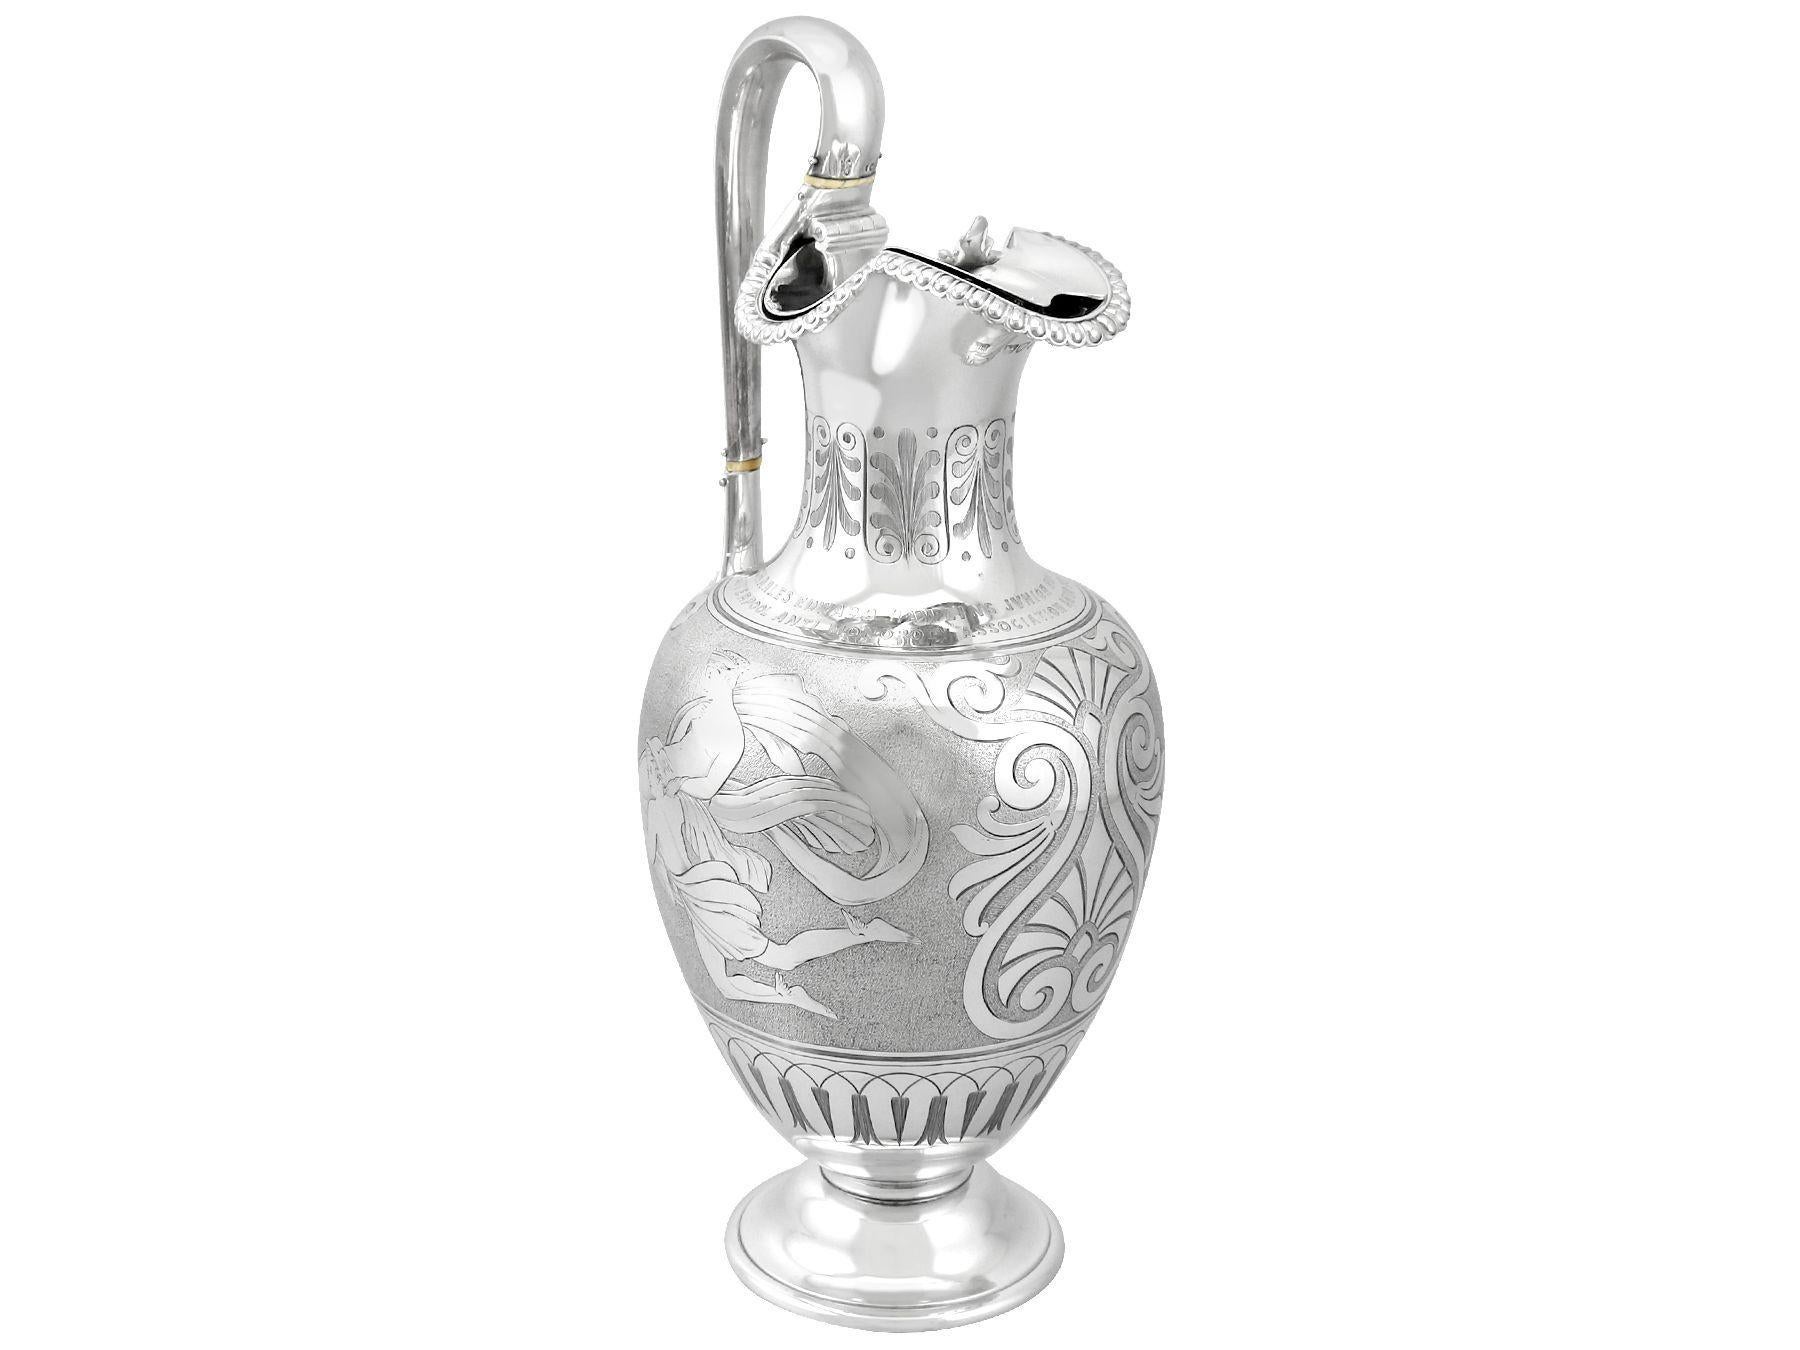 An exceptional, fine and impressive, antique Victorian sterling silver water pitcher/jug; part of our antique dining silverware collection.

This exceptional sterling silver water jug has a baluster shaped form onto a circular spreading